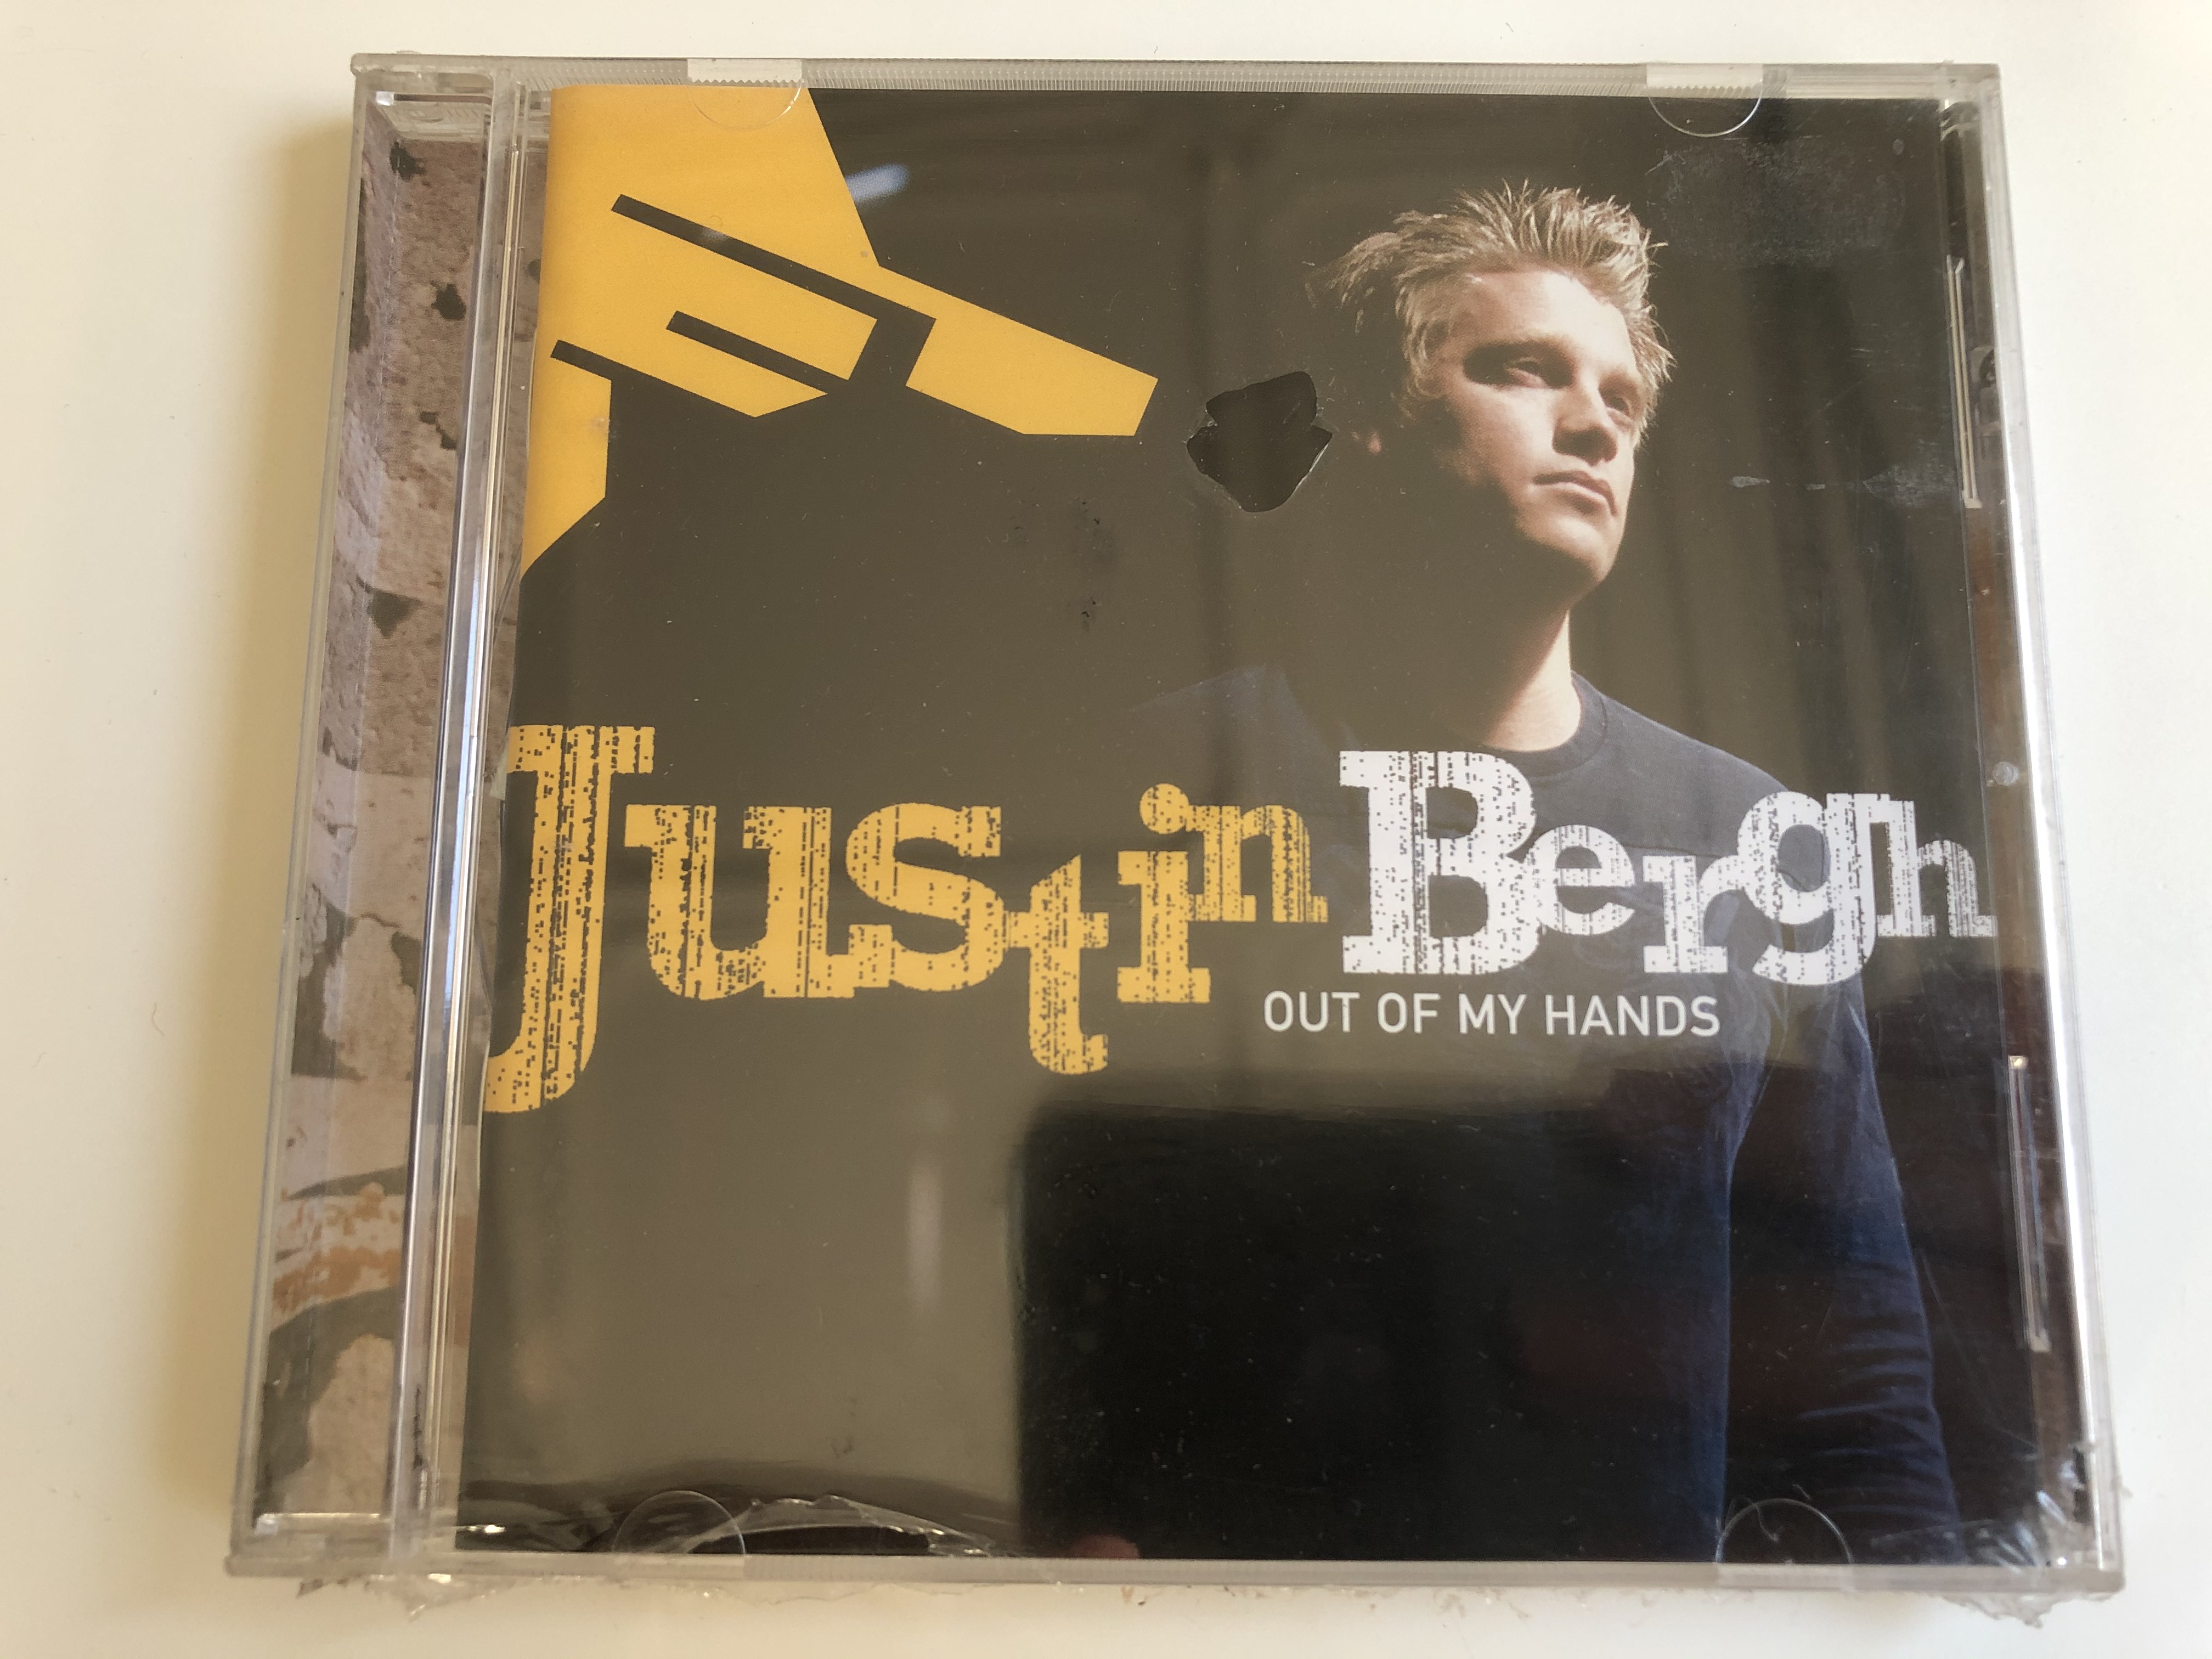 justin-bergh-out-of-my-hands-zyx-music-audio-cd-2005-zyx-20729-2-1-.jpg